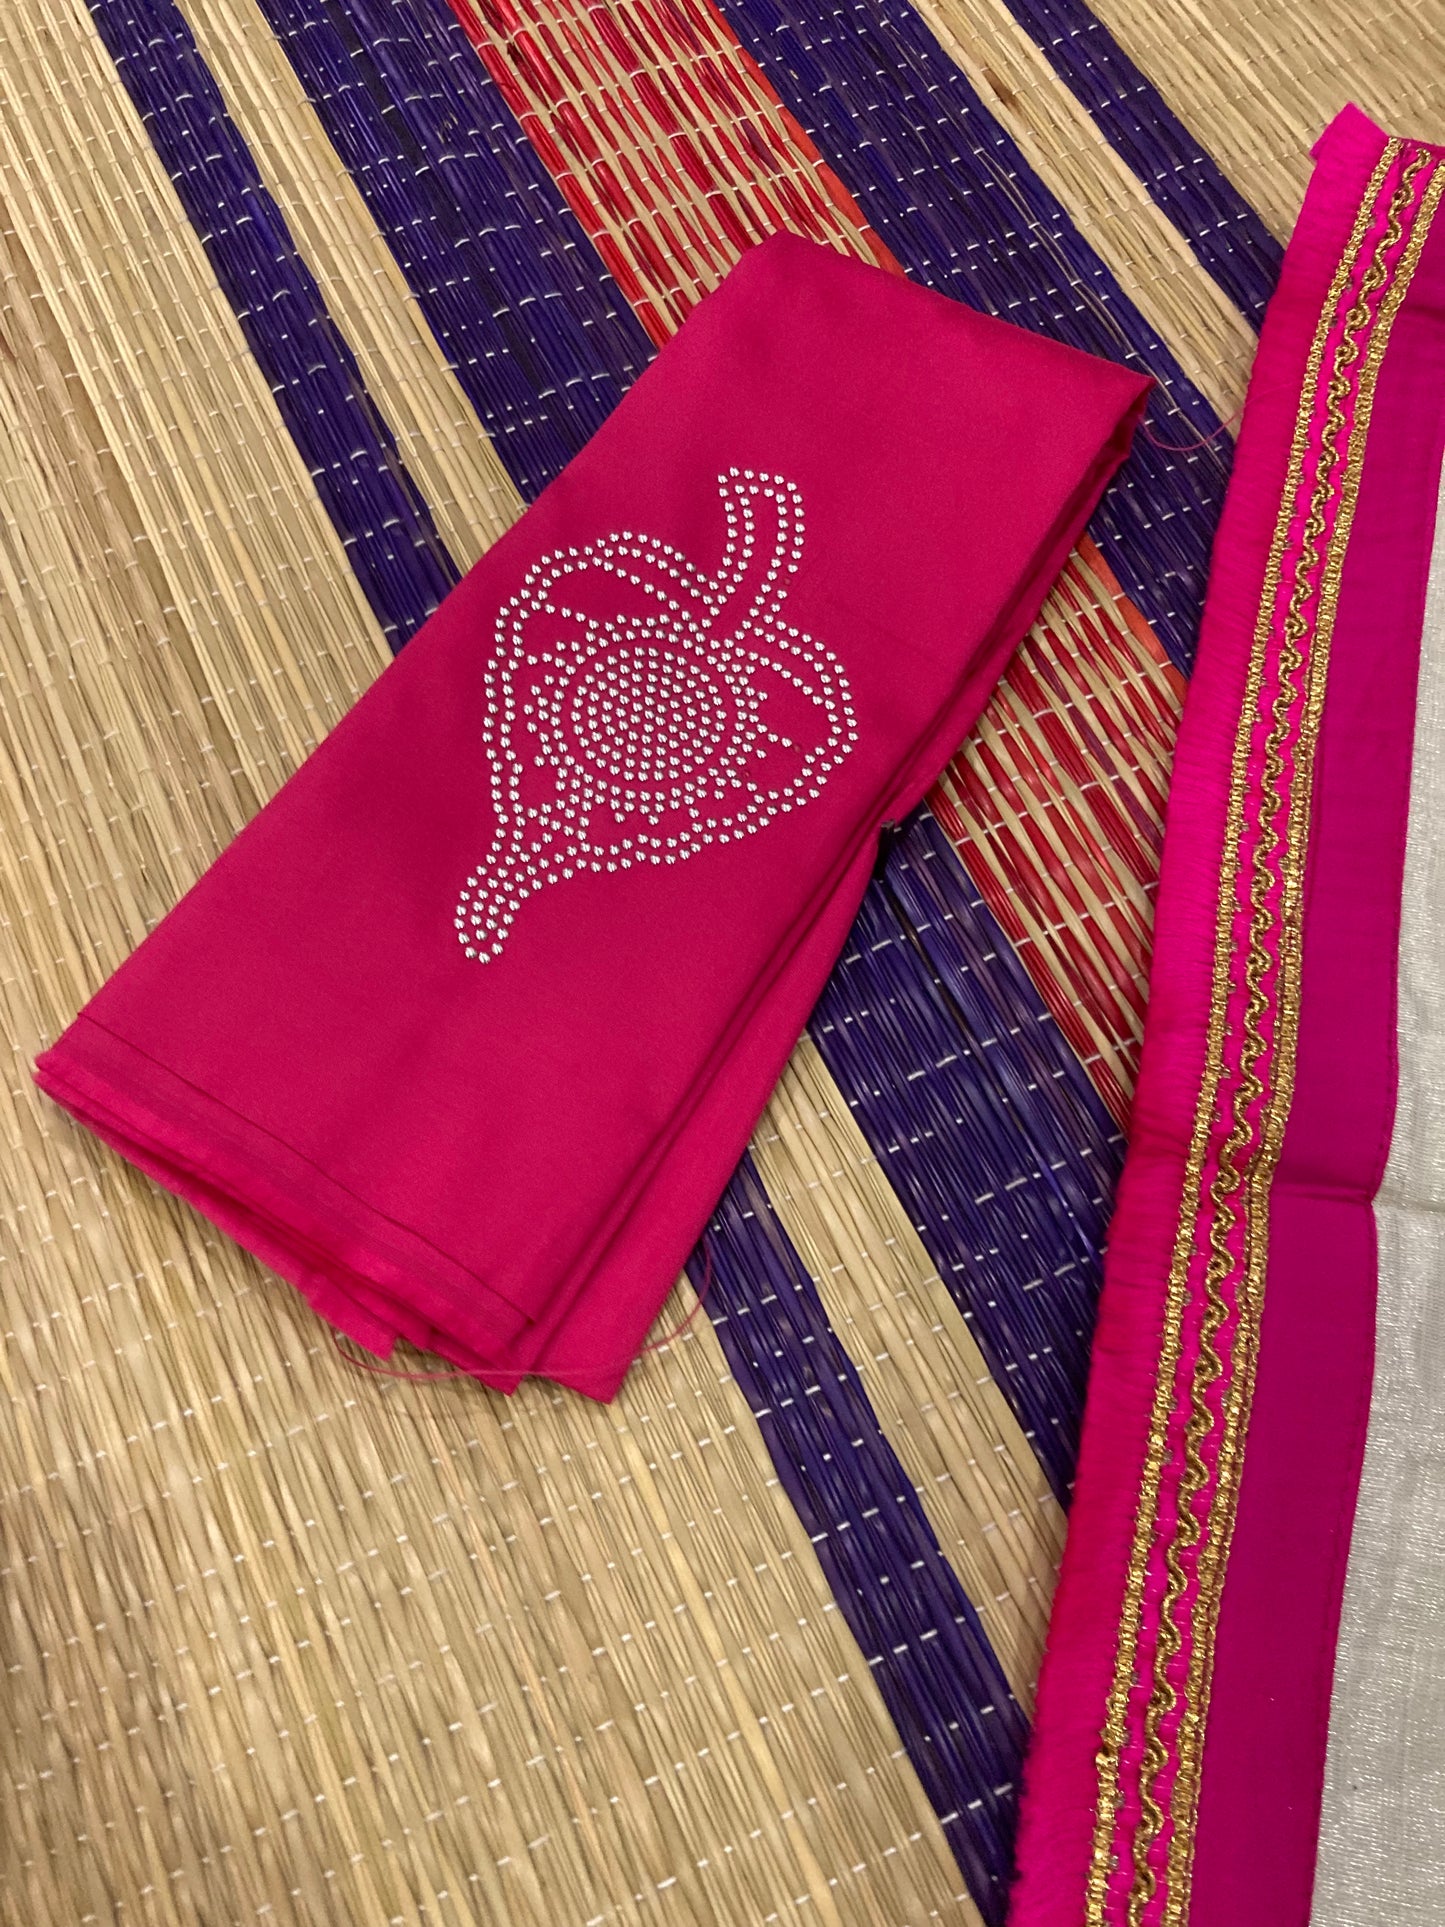 Kerala Silver Tissue Semi Stitched Dhavani Set with Magenta Blouse Piece and Neriyathu with Magenta Border